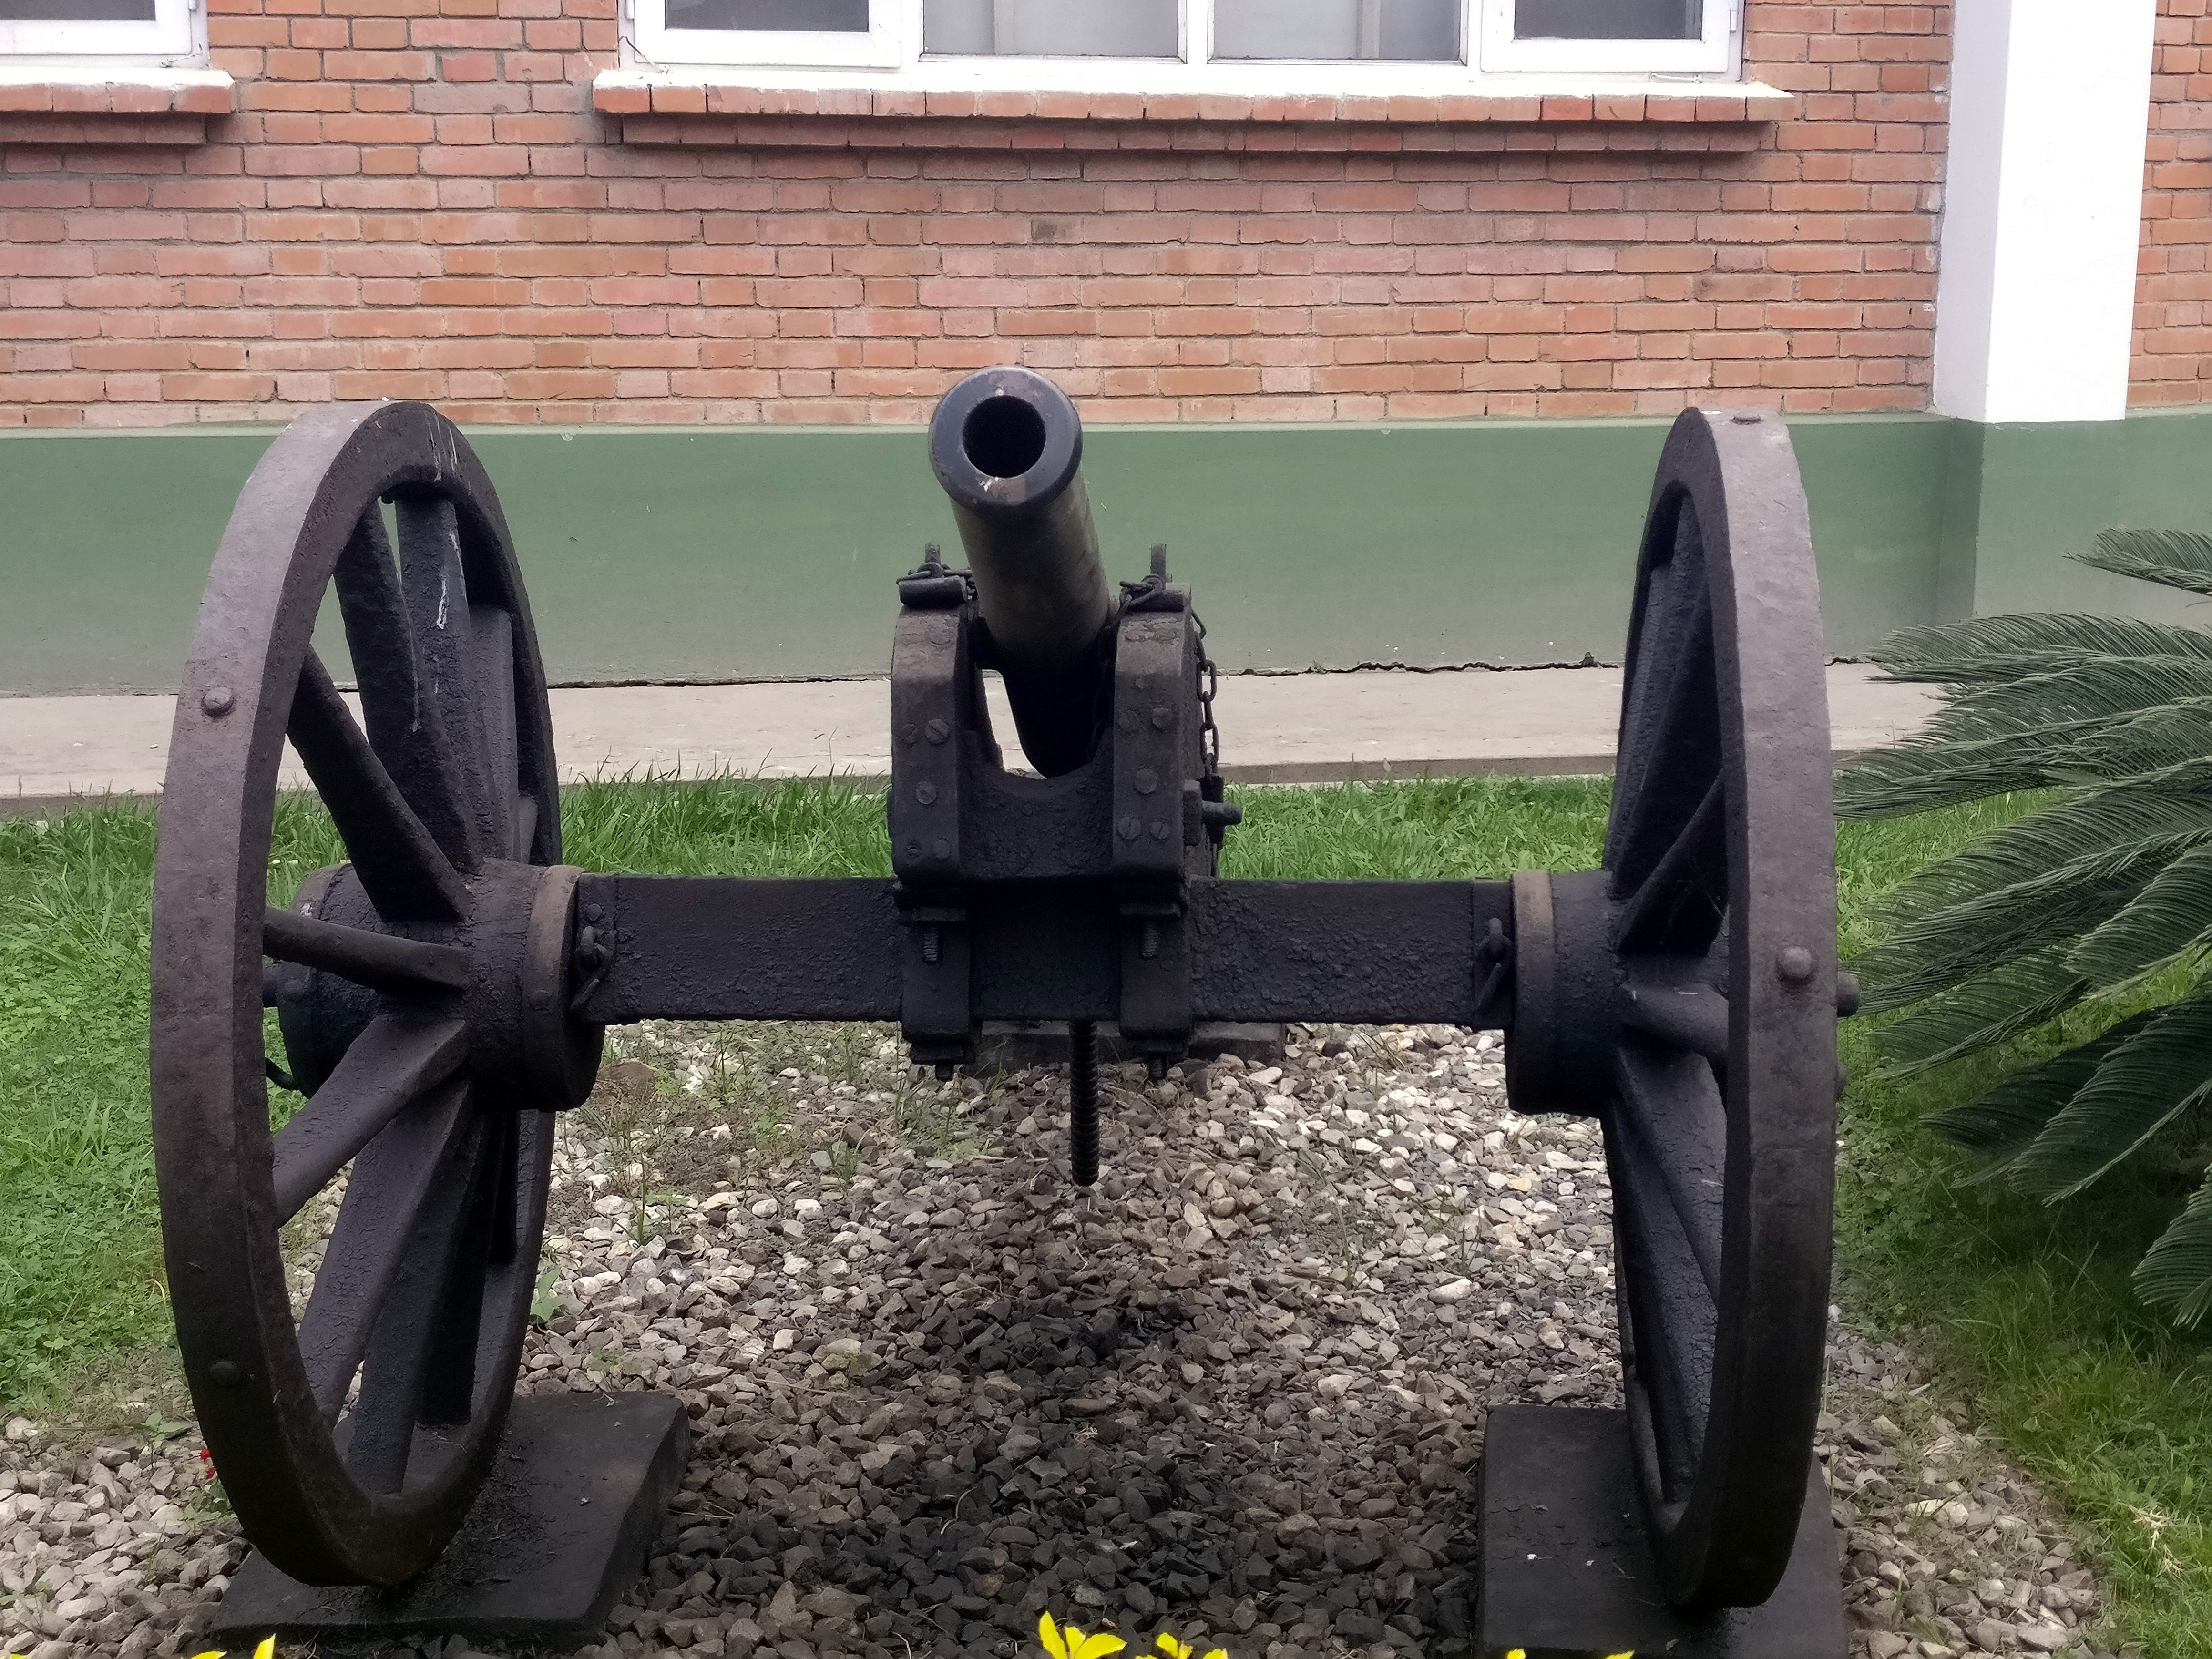 Anonther cannon on display